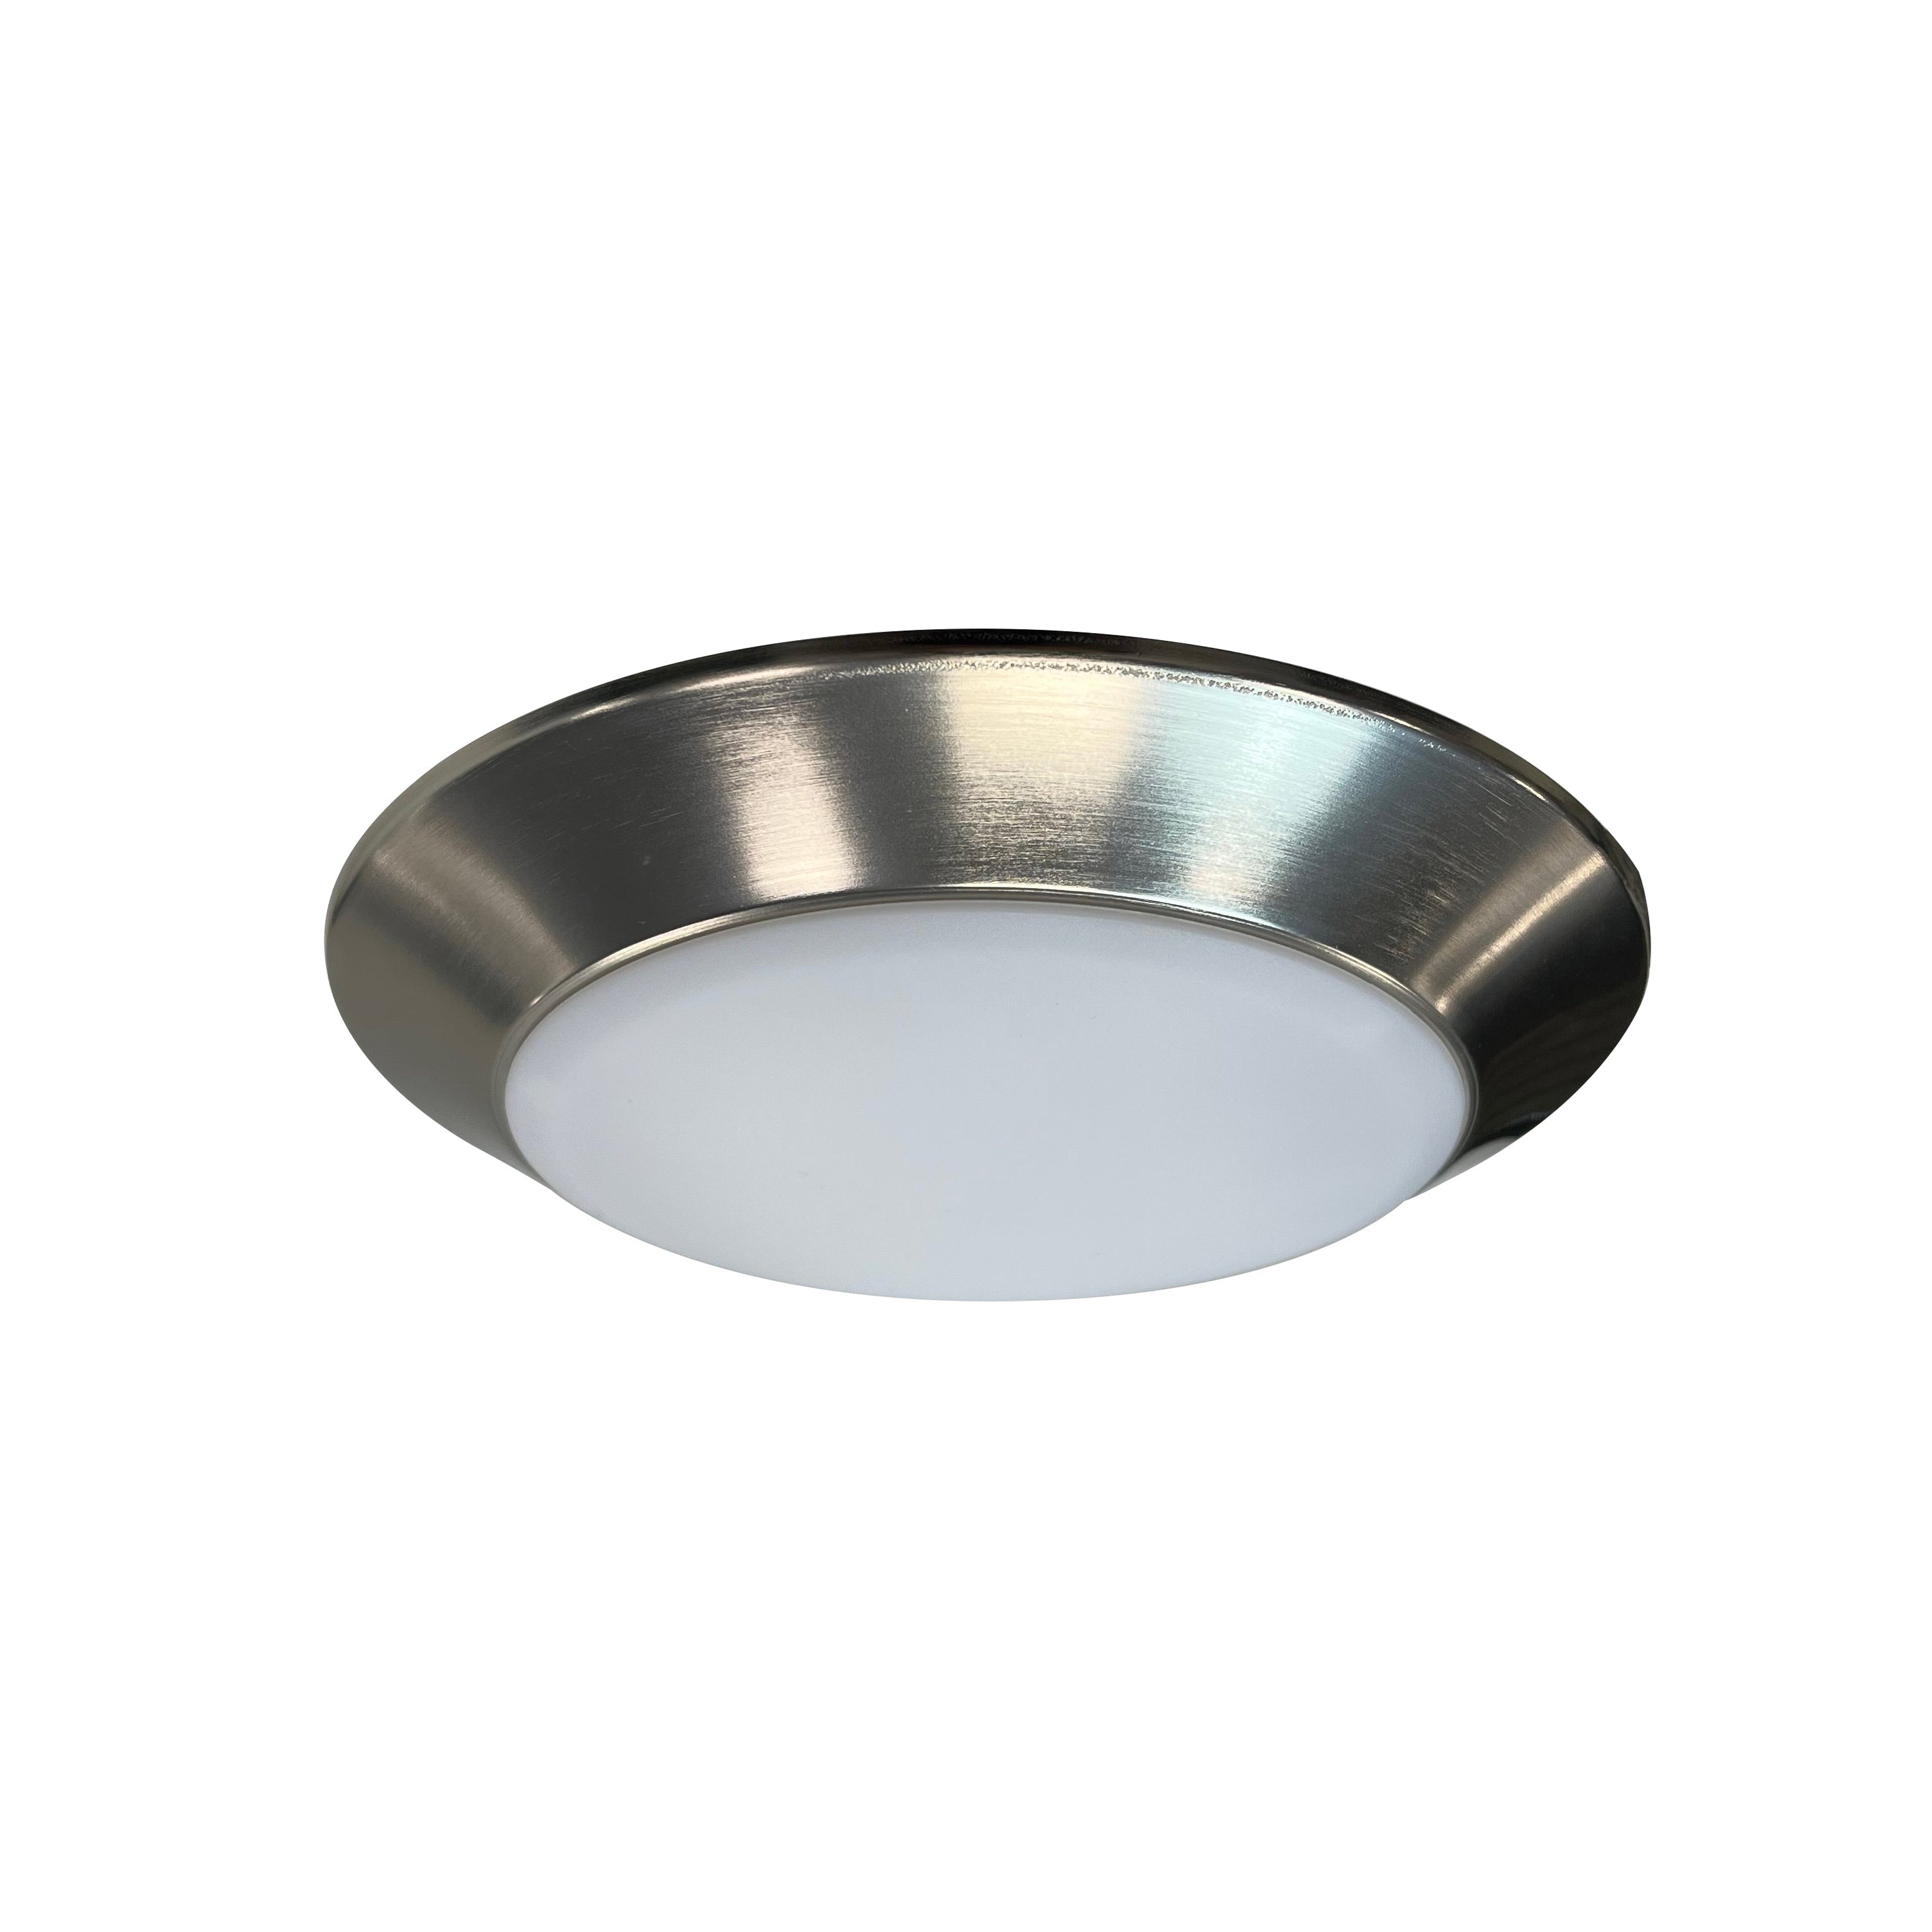 Nora Lighting NLOPAC-R6TWNM - Surface - 6 Inch AC Opal LED Surface Mount, 1200lm / 16W, Selectable CCT, Natural Metal finish